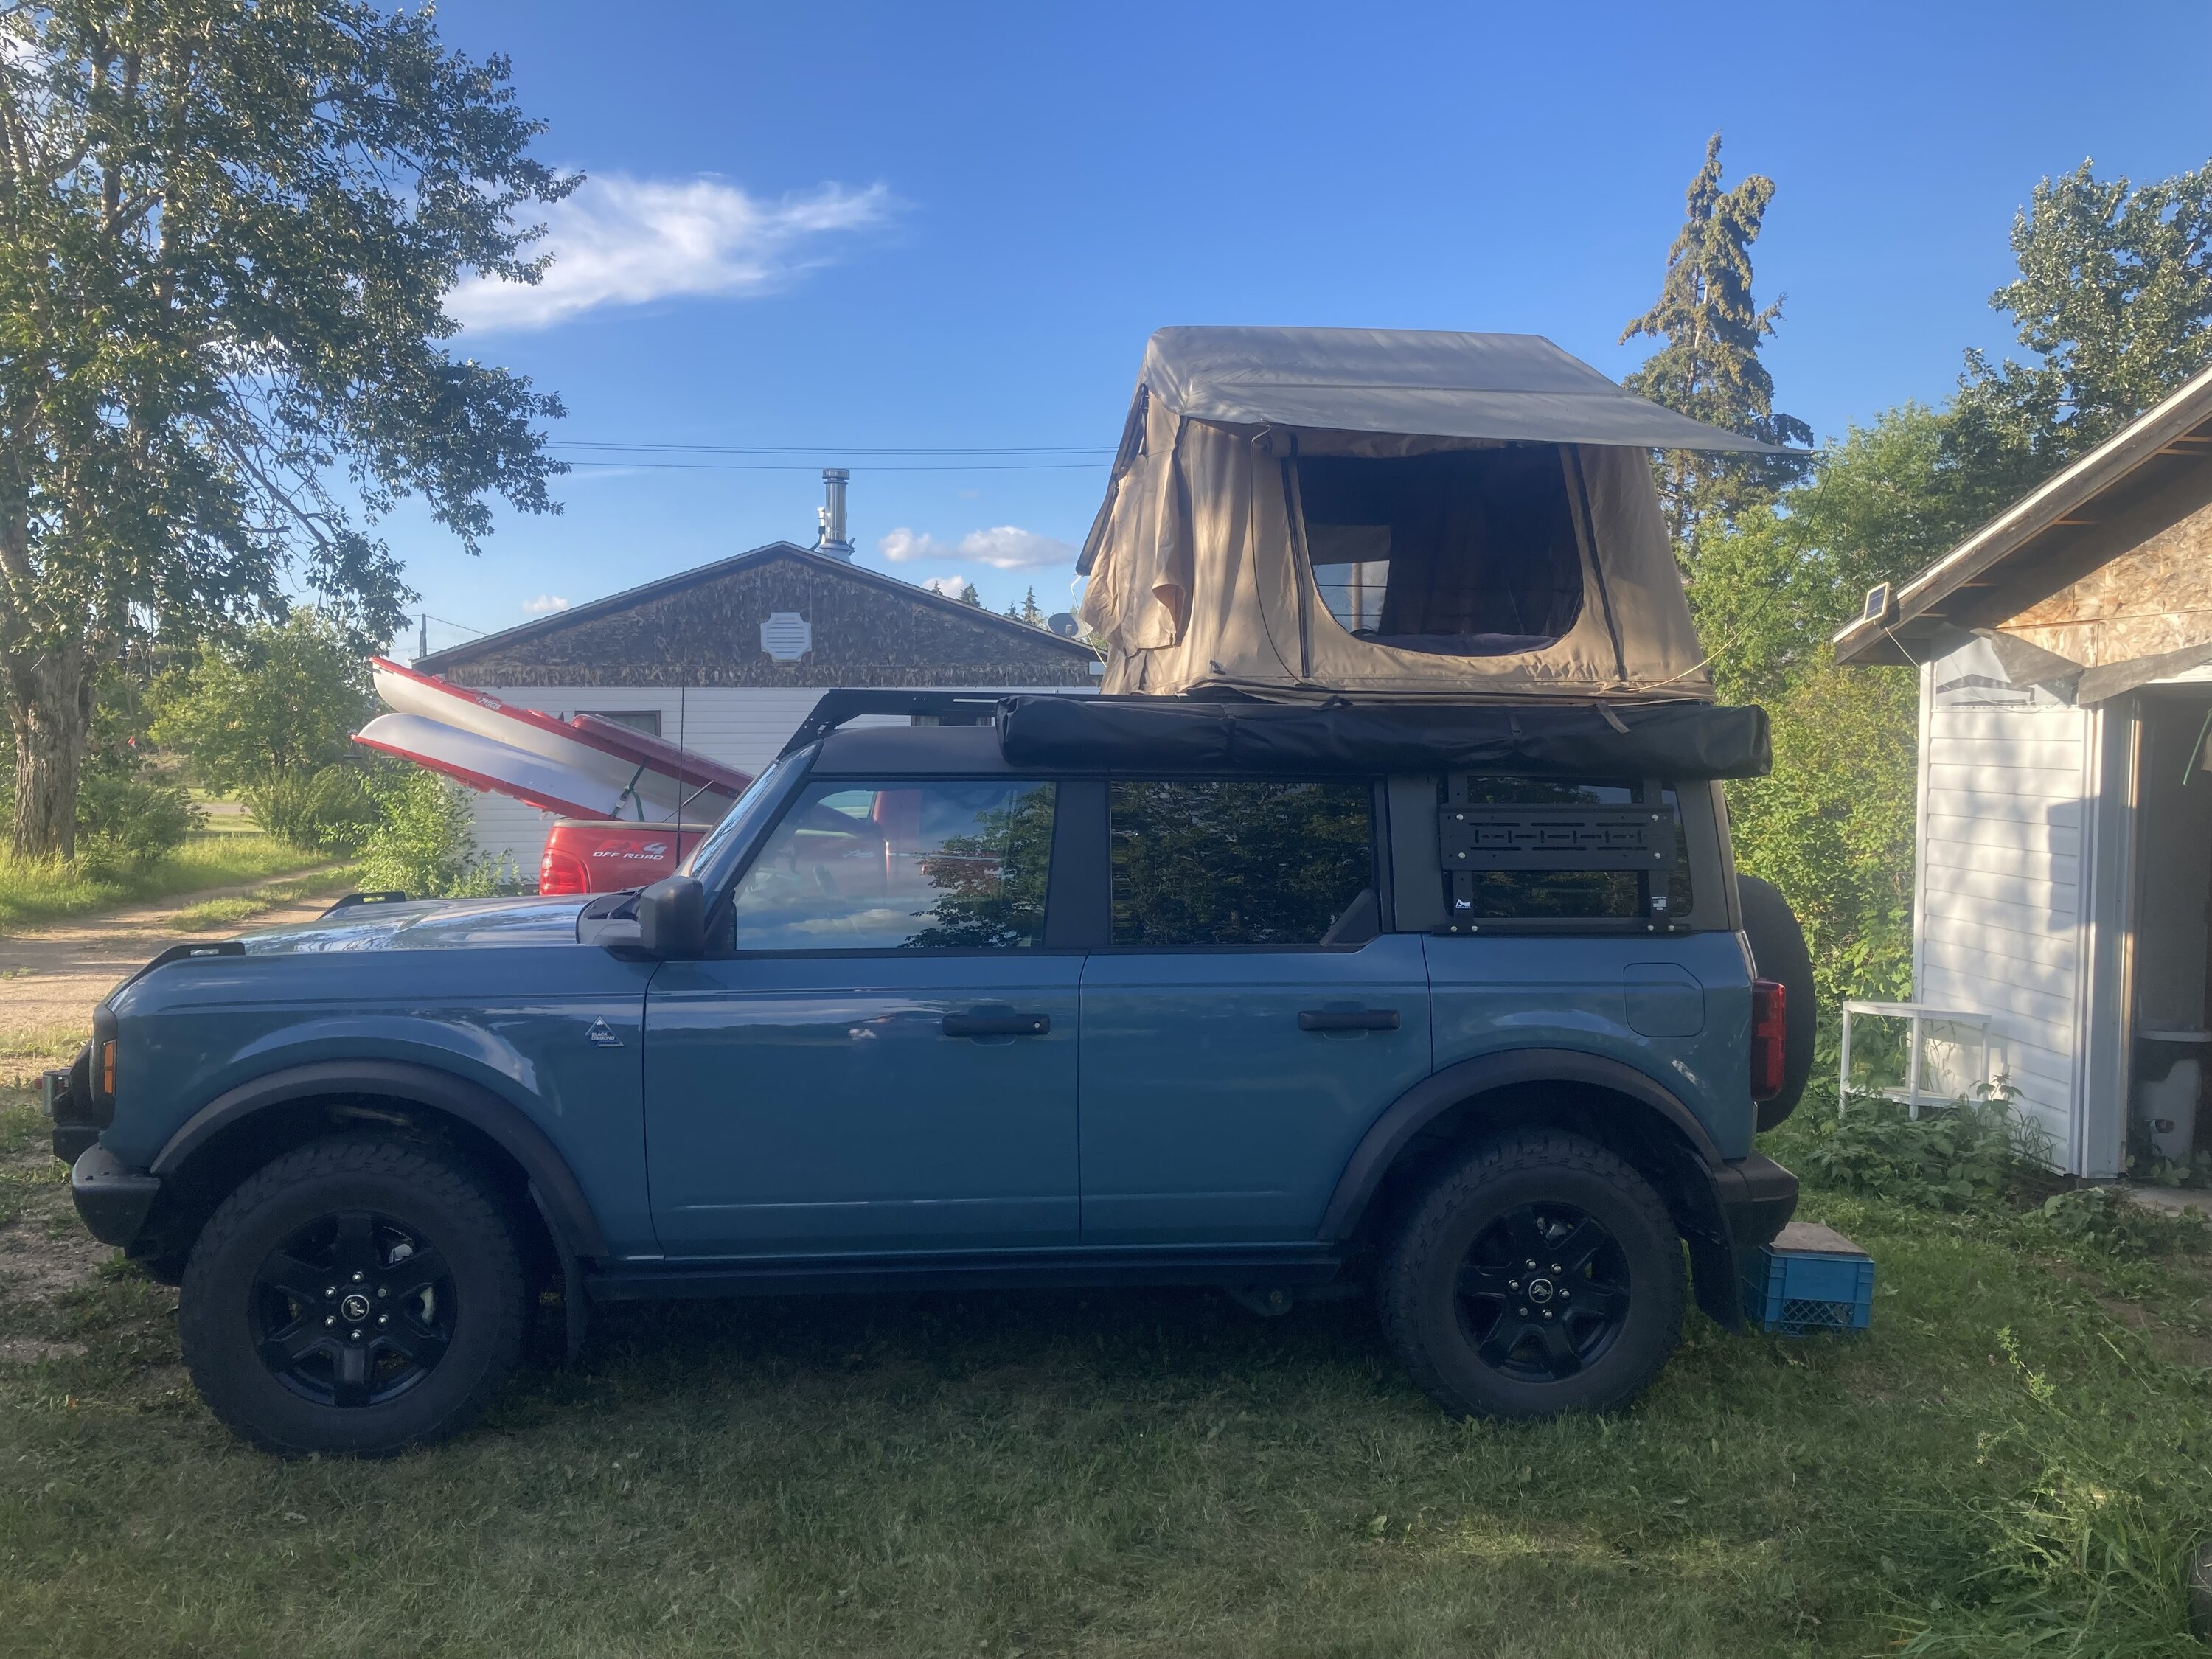 Ford Bronco Let's see your roof-top Tents and camping setups! IMG_1947.JPG